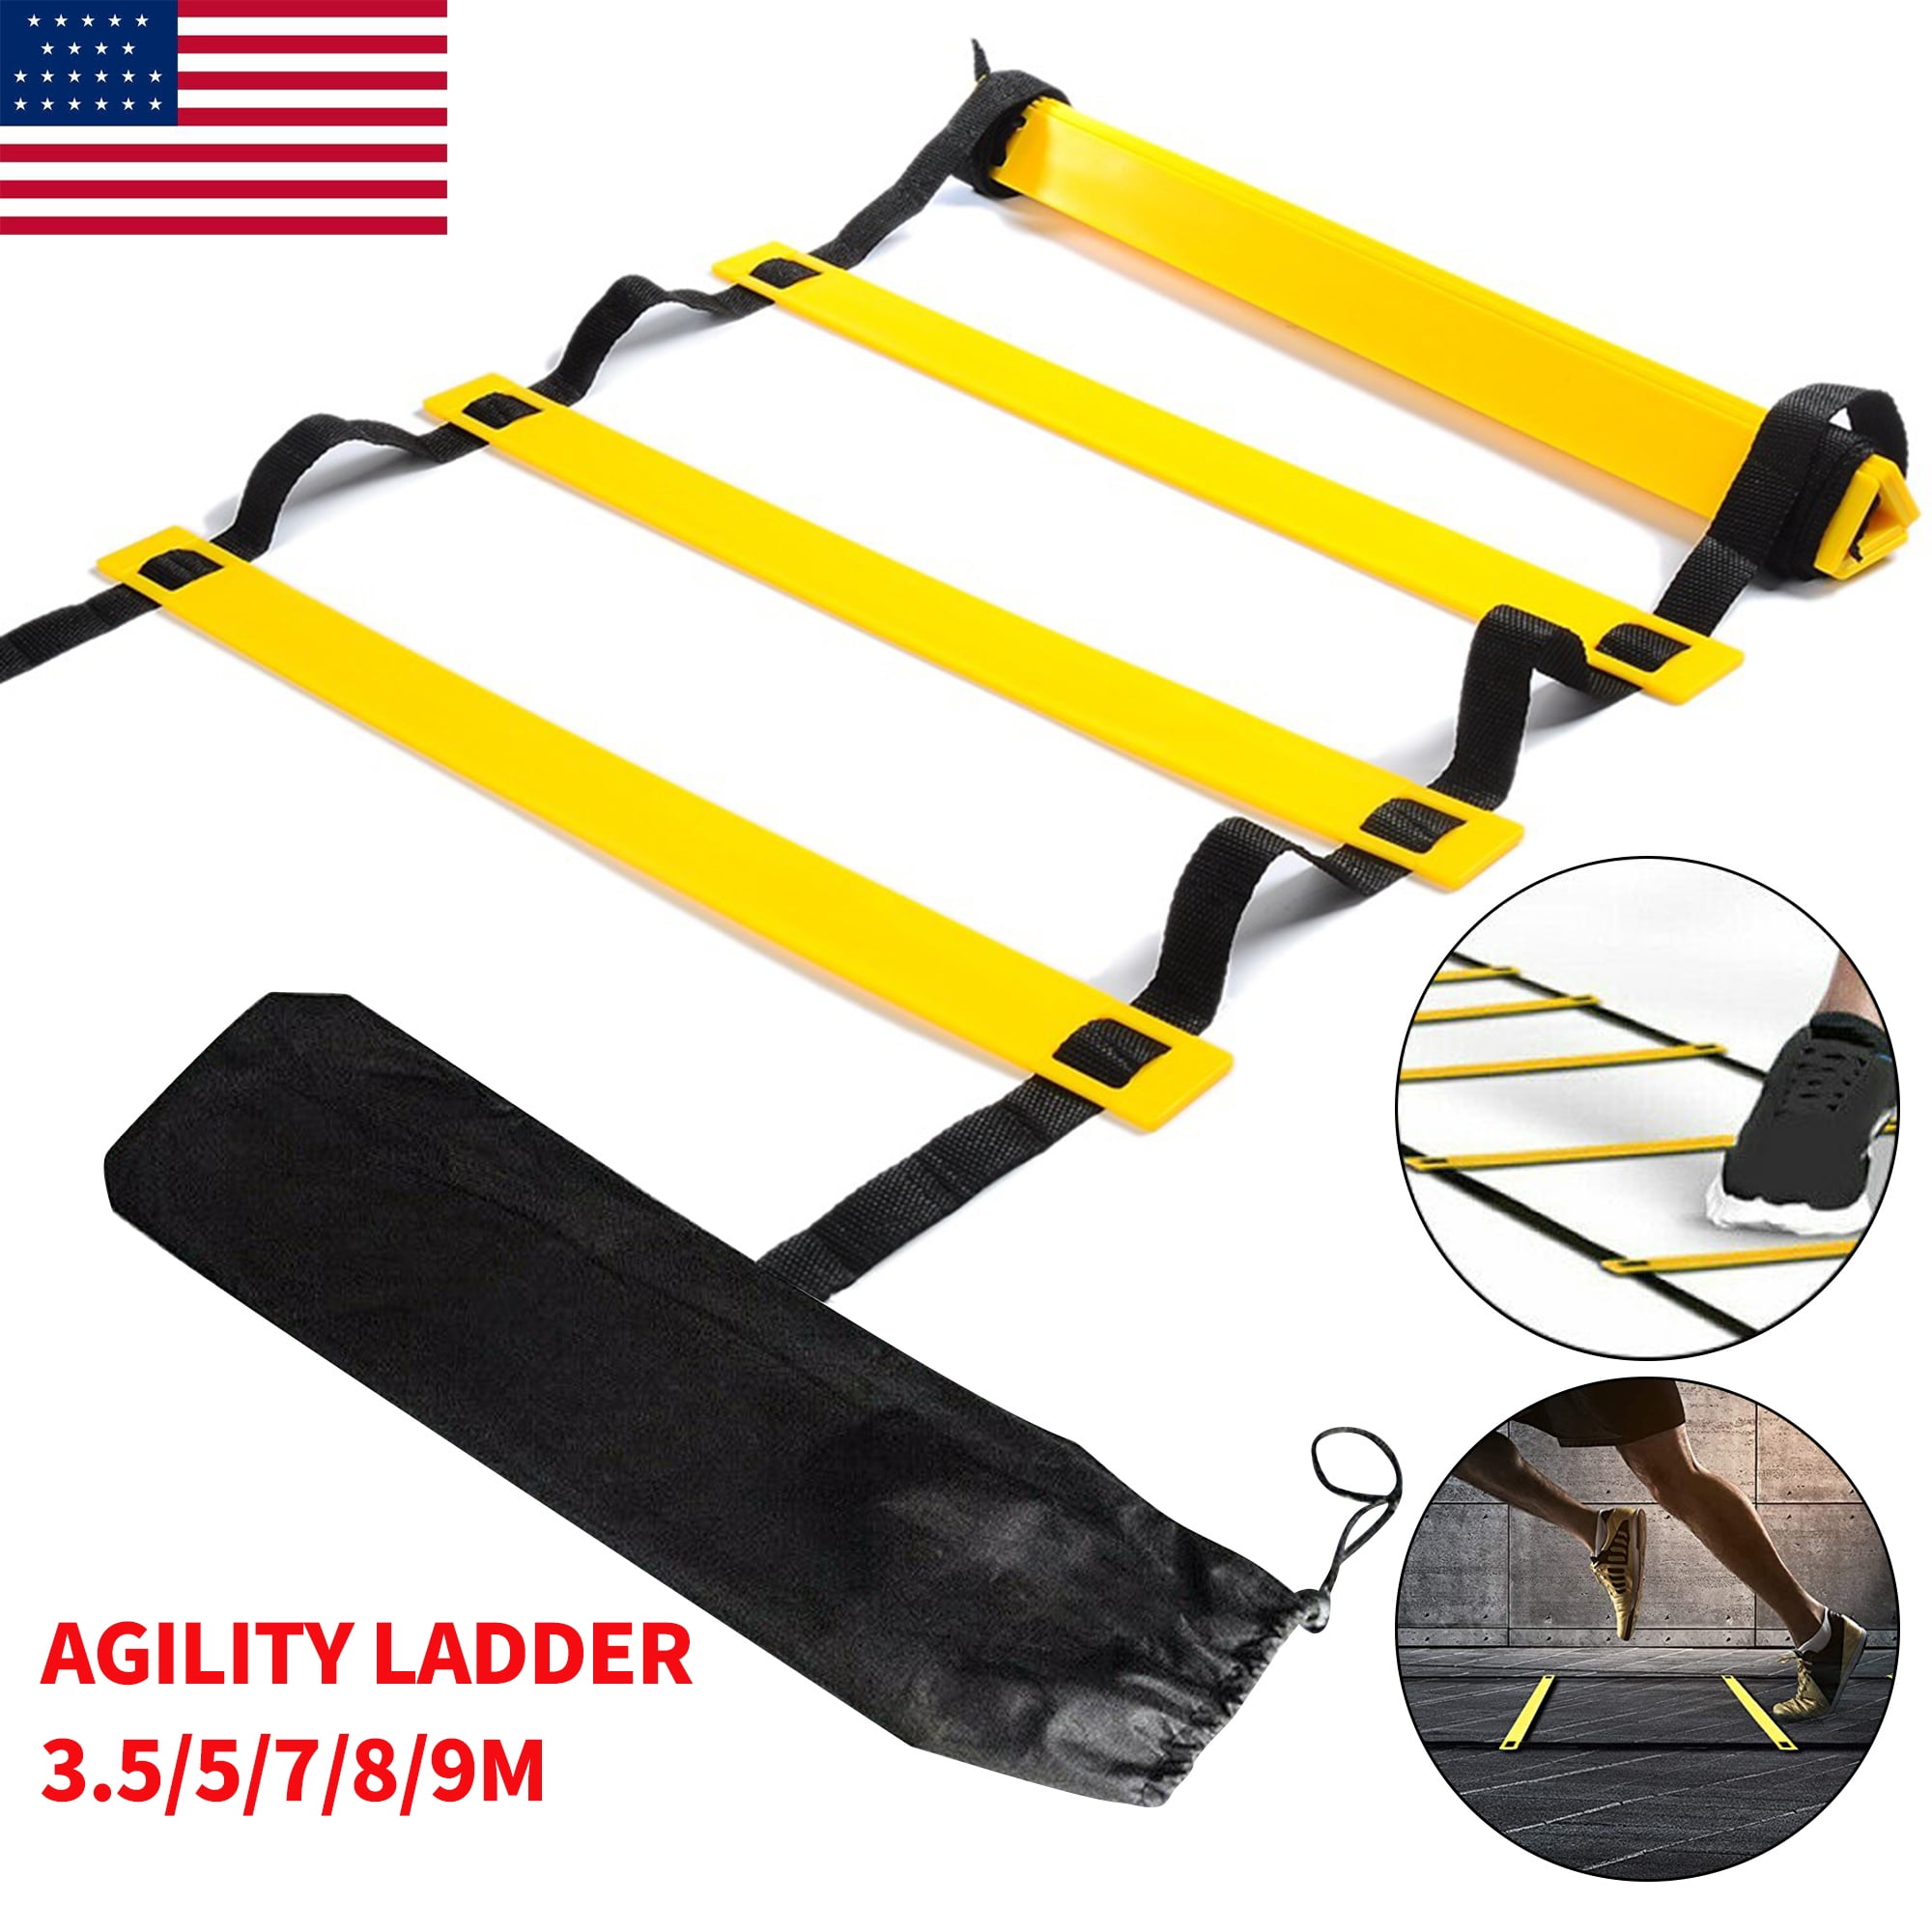 7M Sports Agility Ladder Fitness Training Ladder Soccer Sports Footwork Practise 